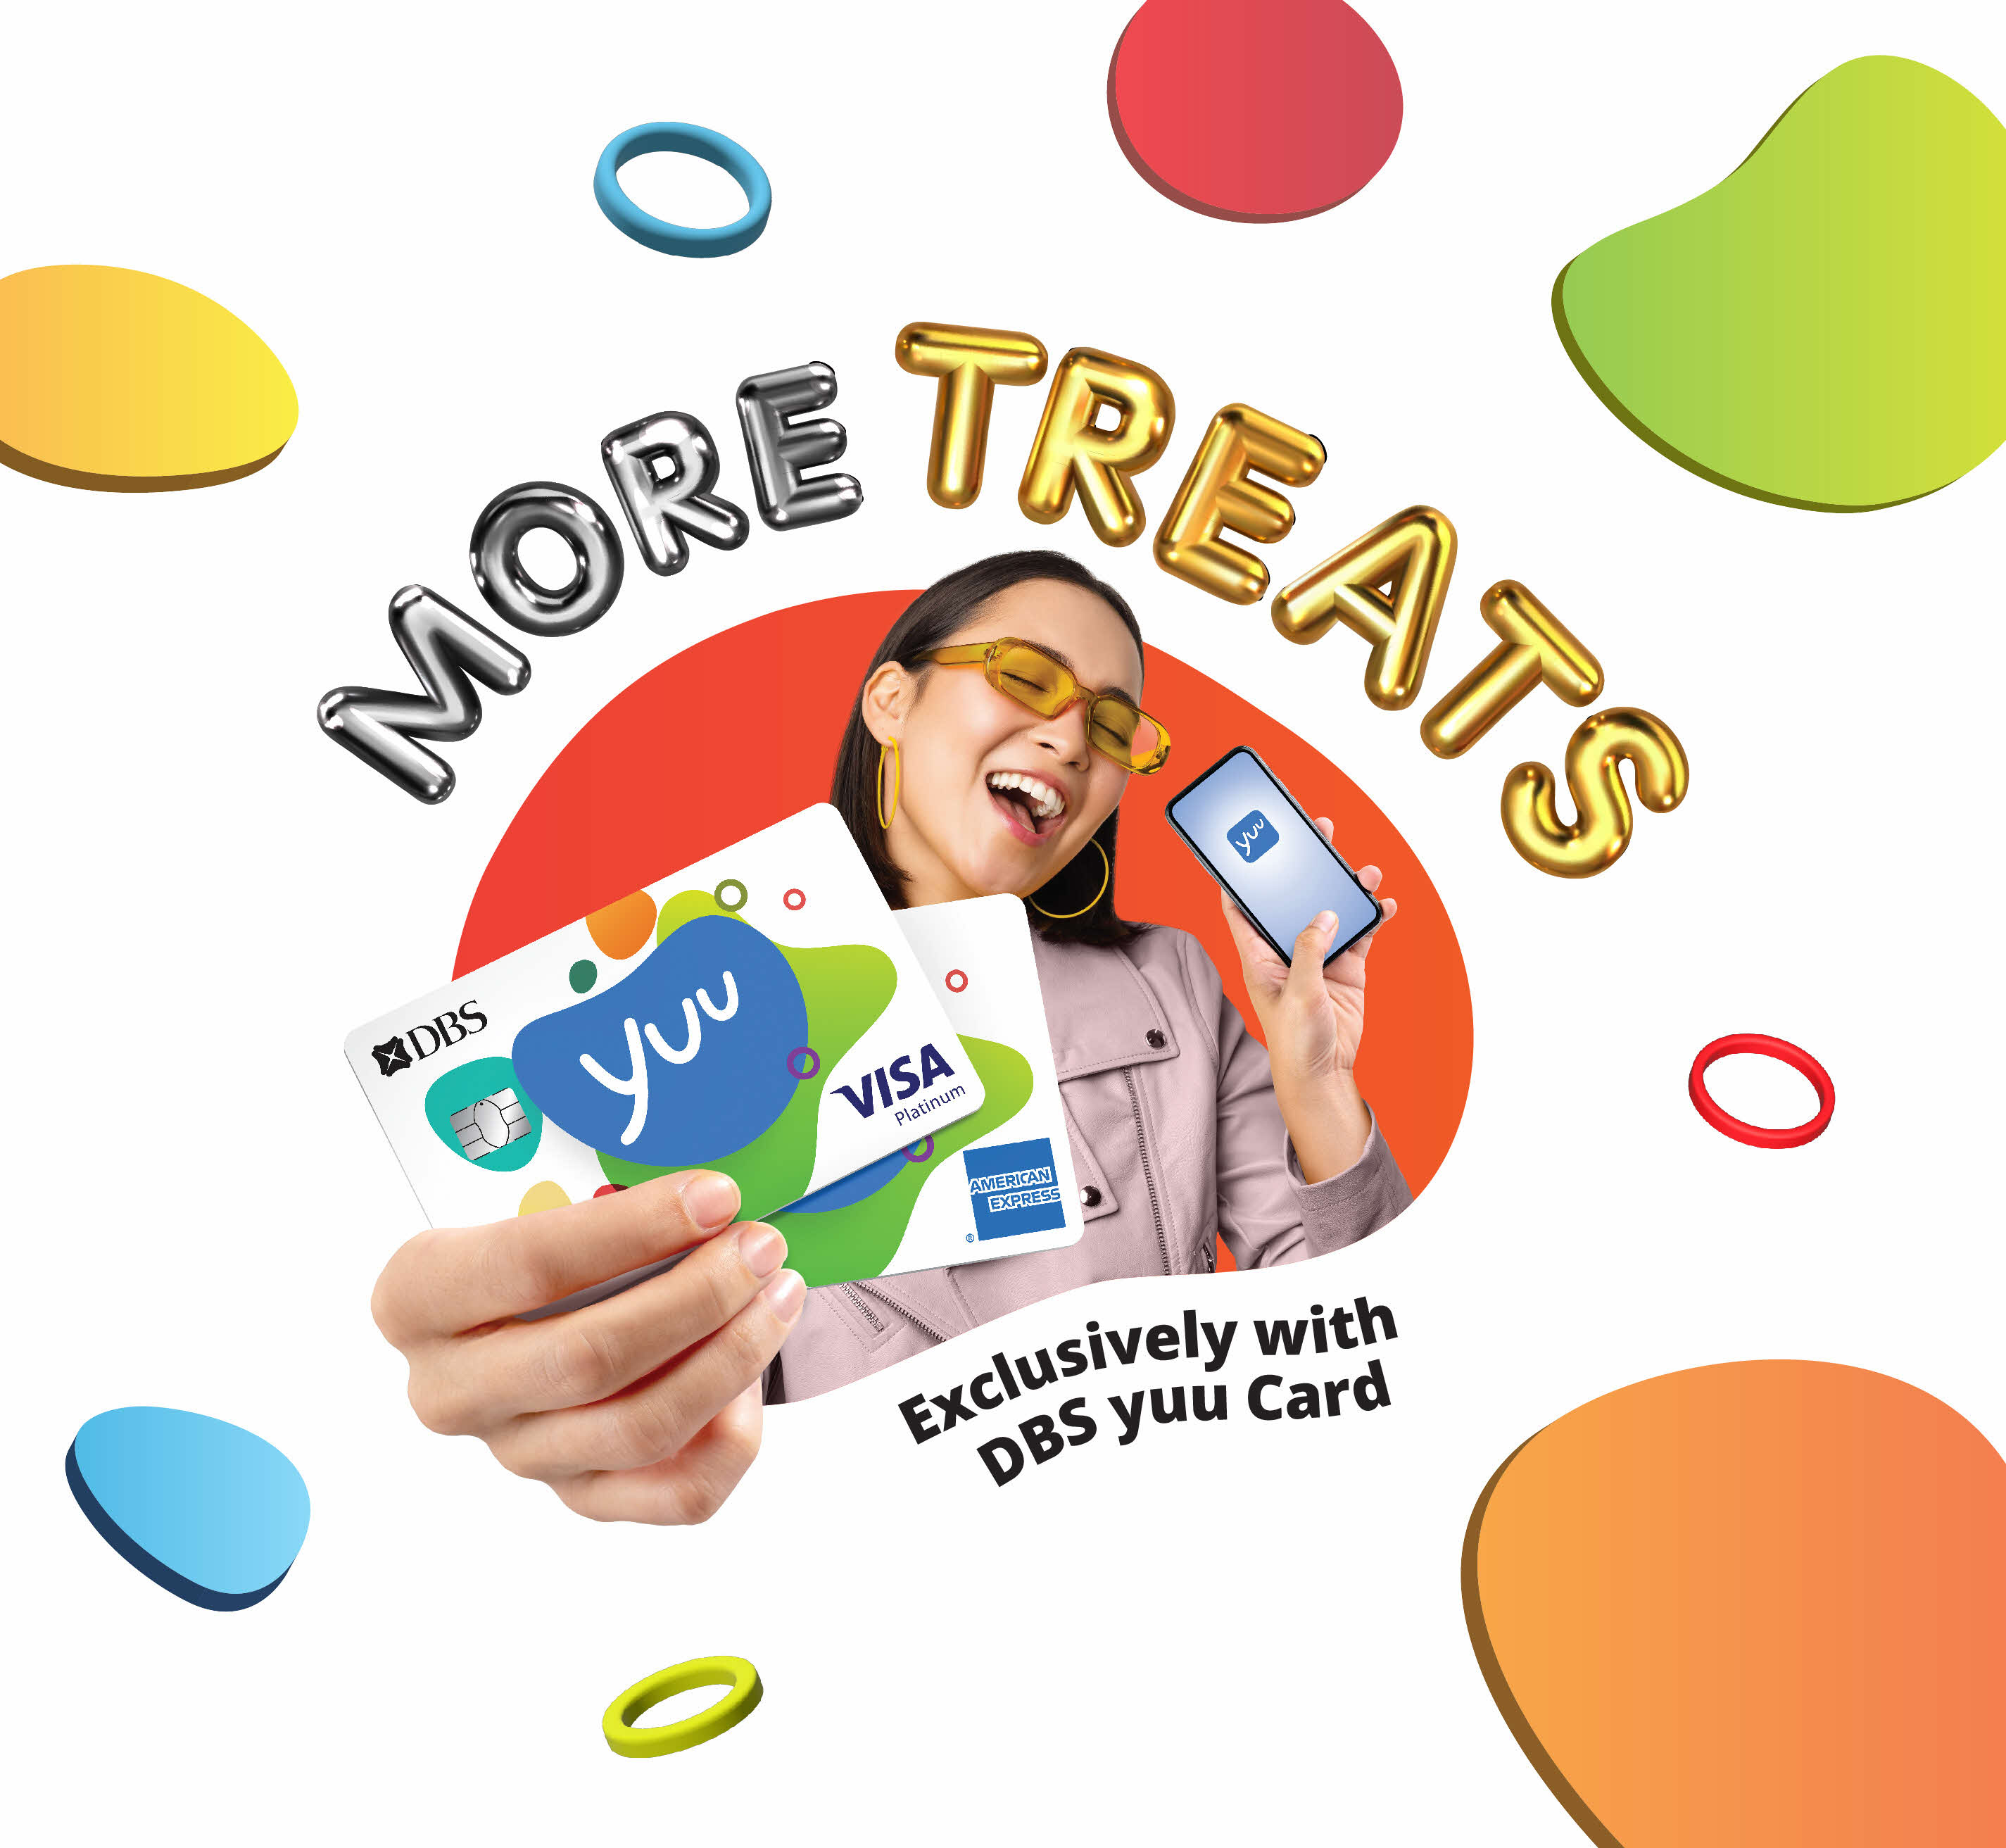 Enjoy special treats from us with DBS yuu Card!